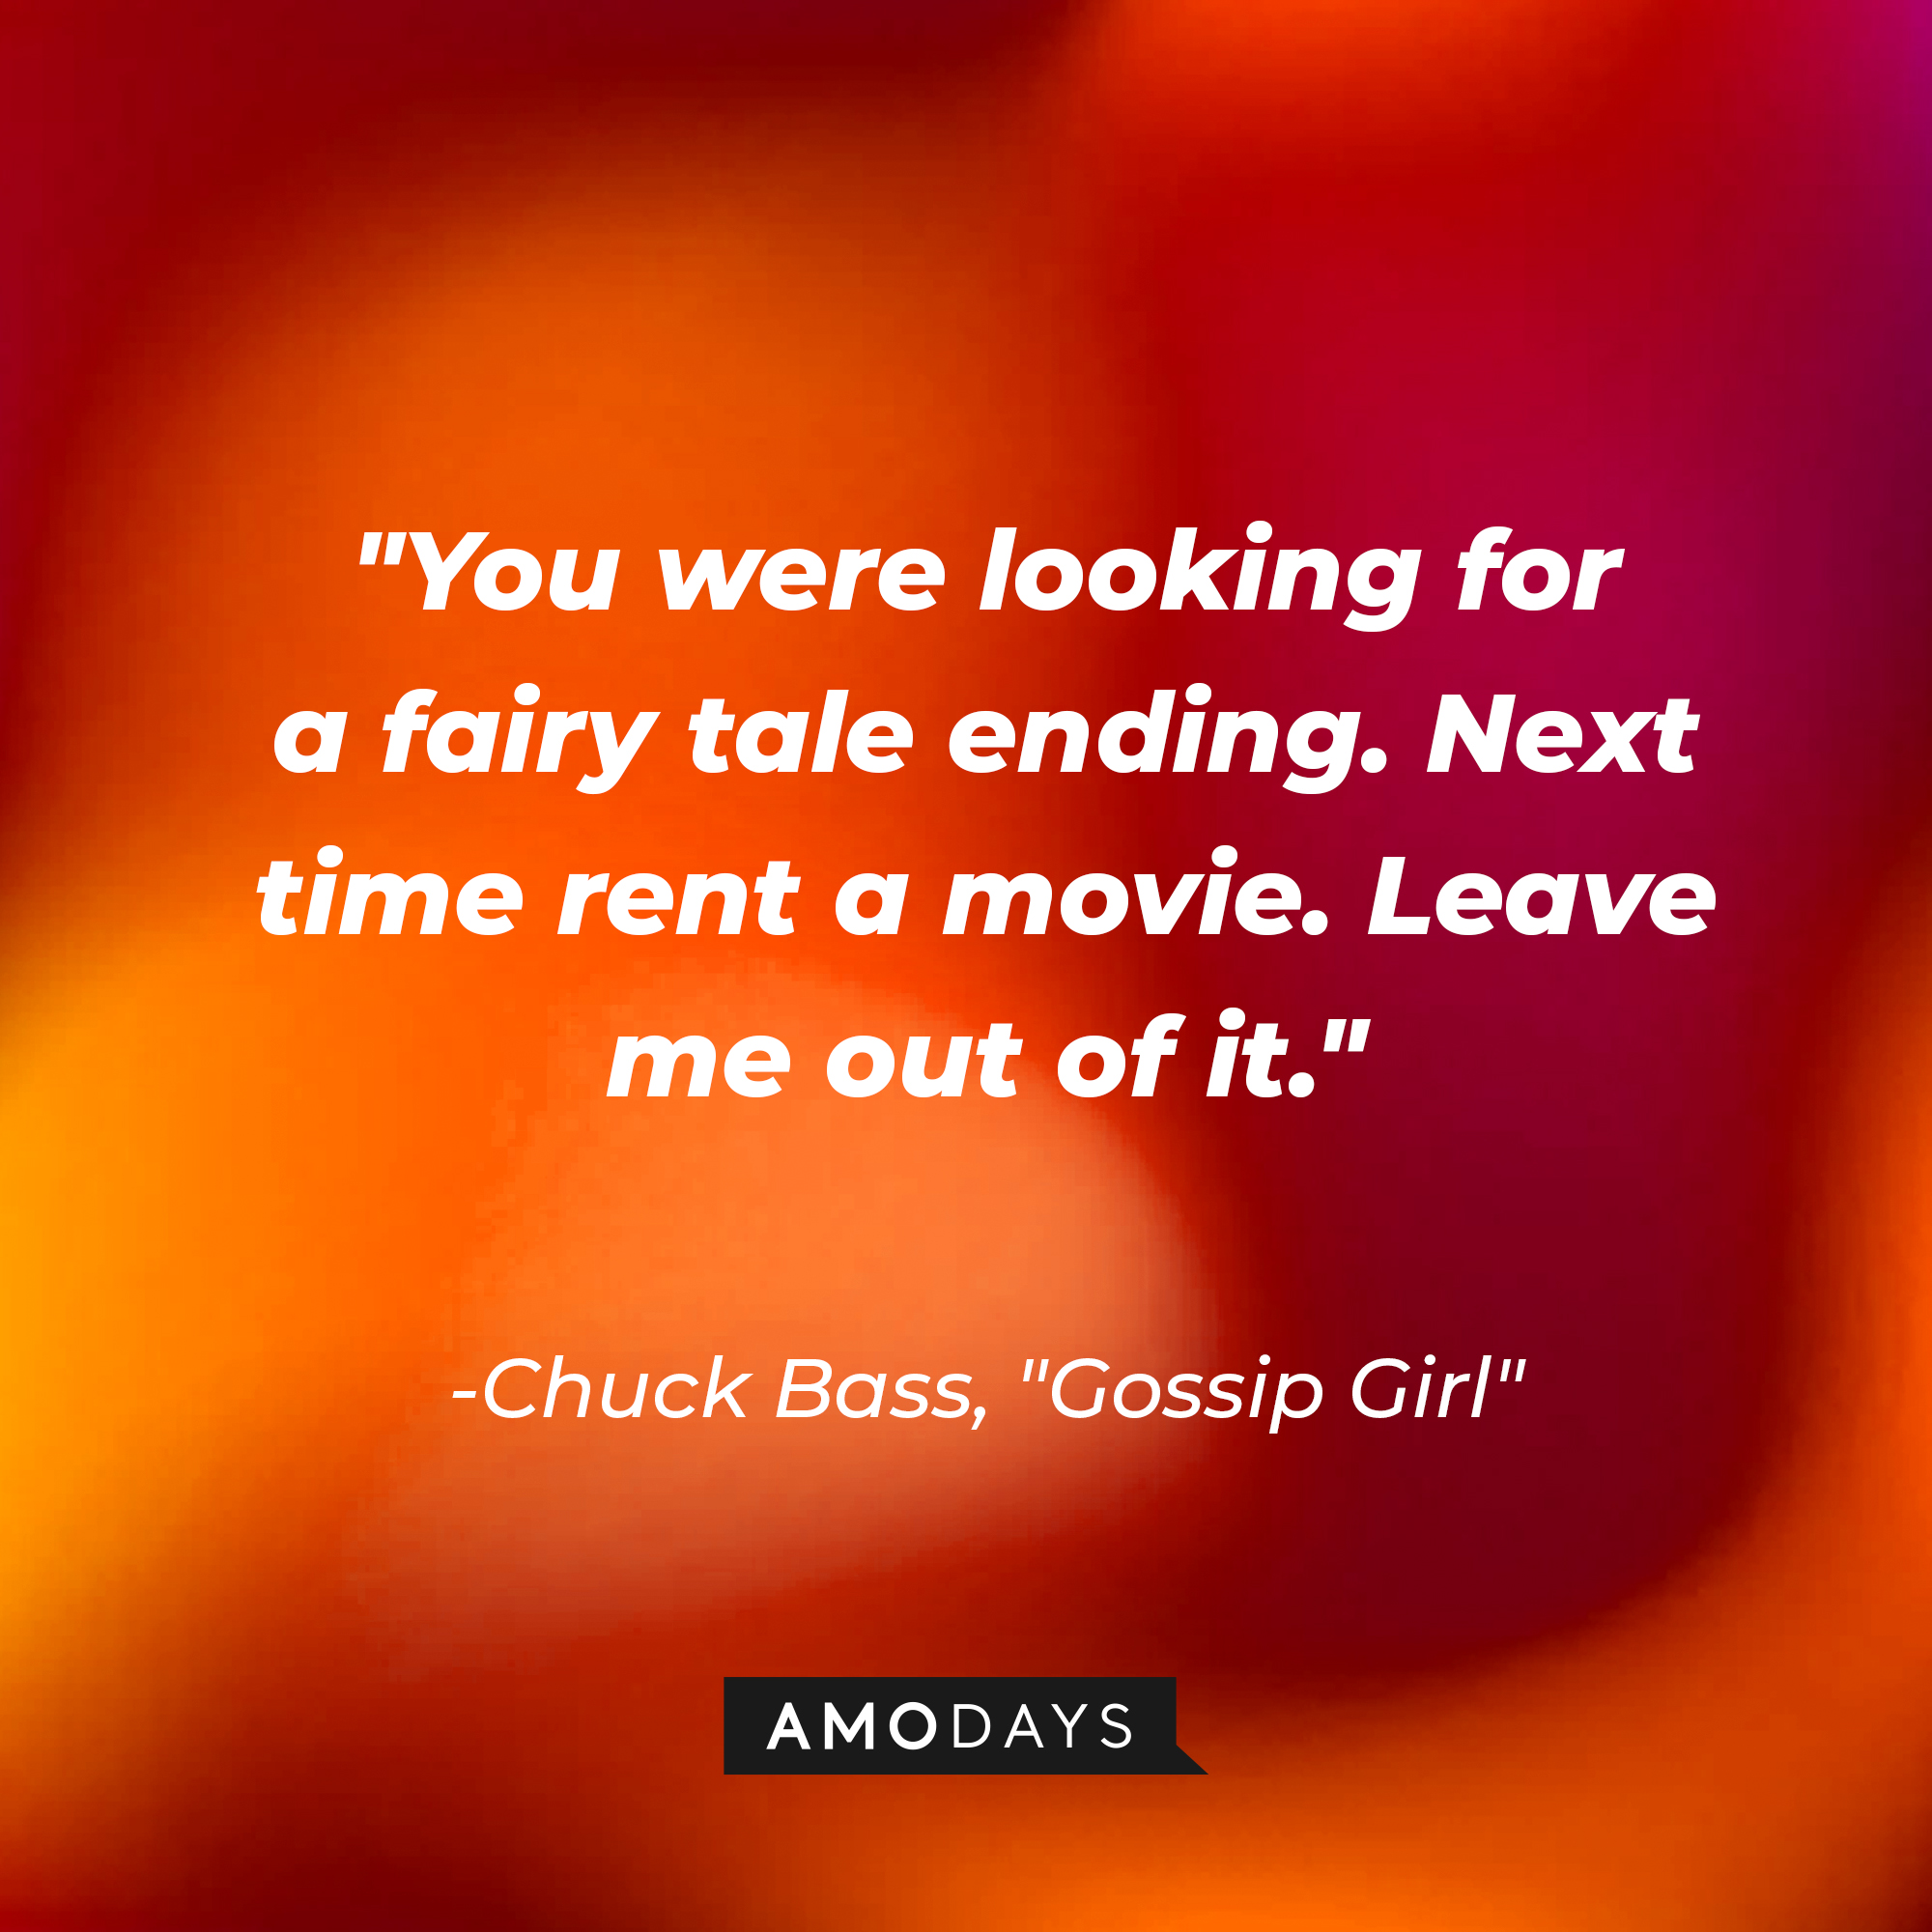 Chuck Bass' quote: "You were looking for a fairy tale ending. Next time rent a movie. Leave me out of it." | Source: AmoDays